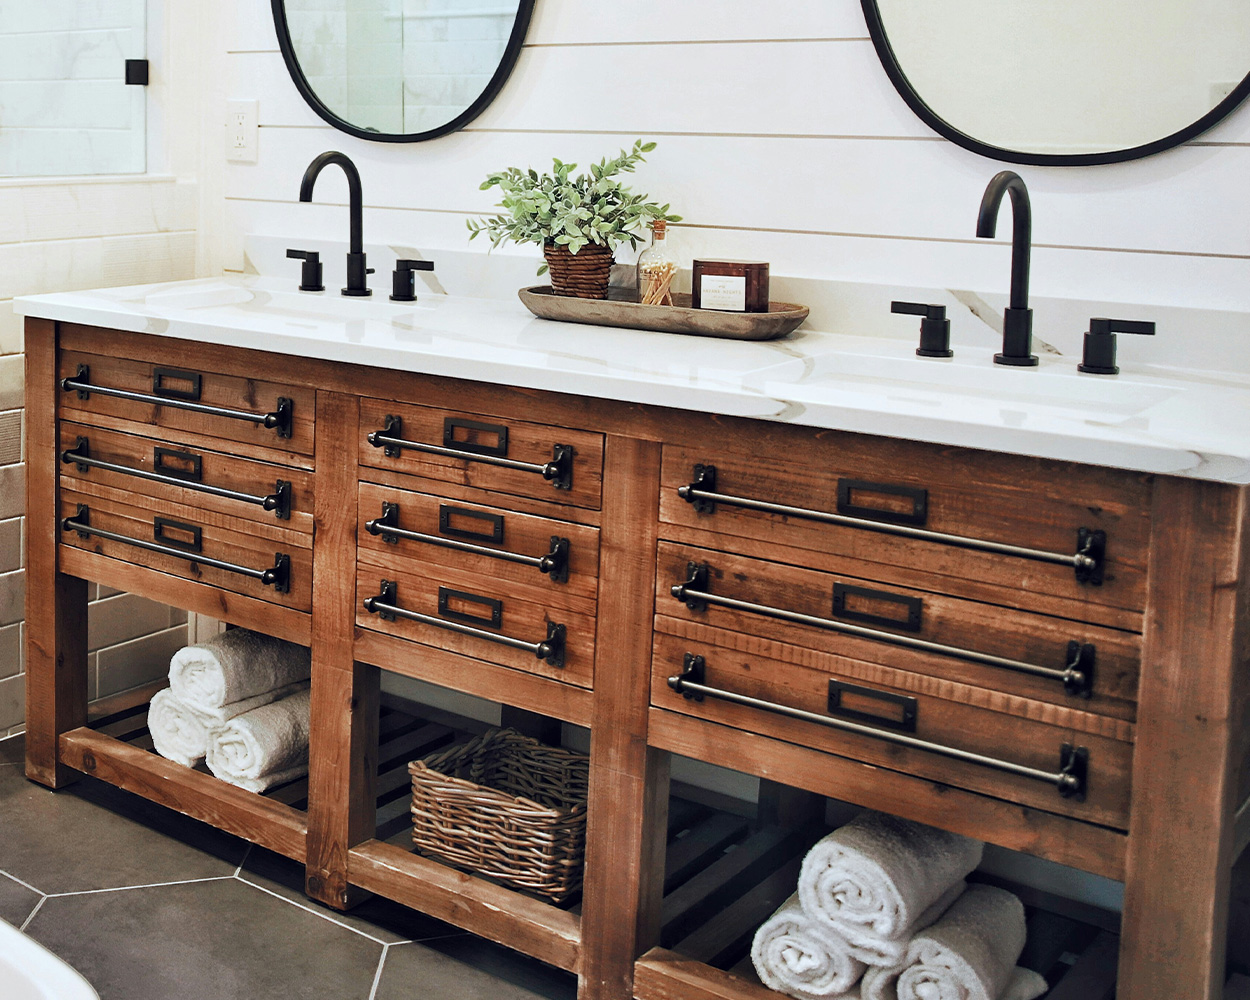 Wooden bathroom vanity with marble countertop, two sinks, nine drawers, organized towels, wicker basket, and decor.